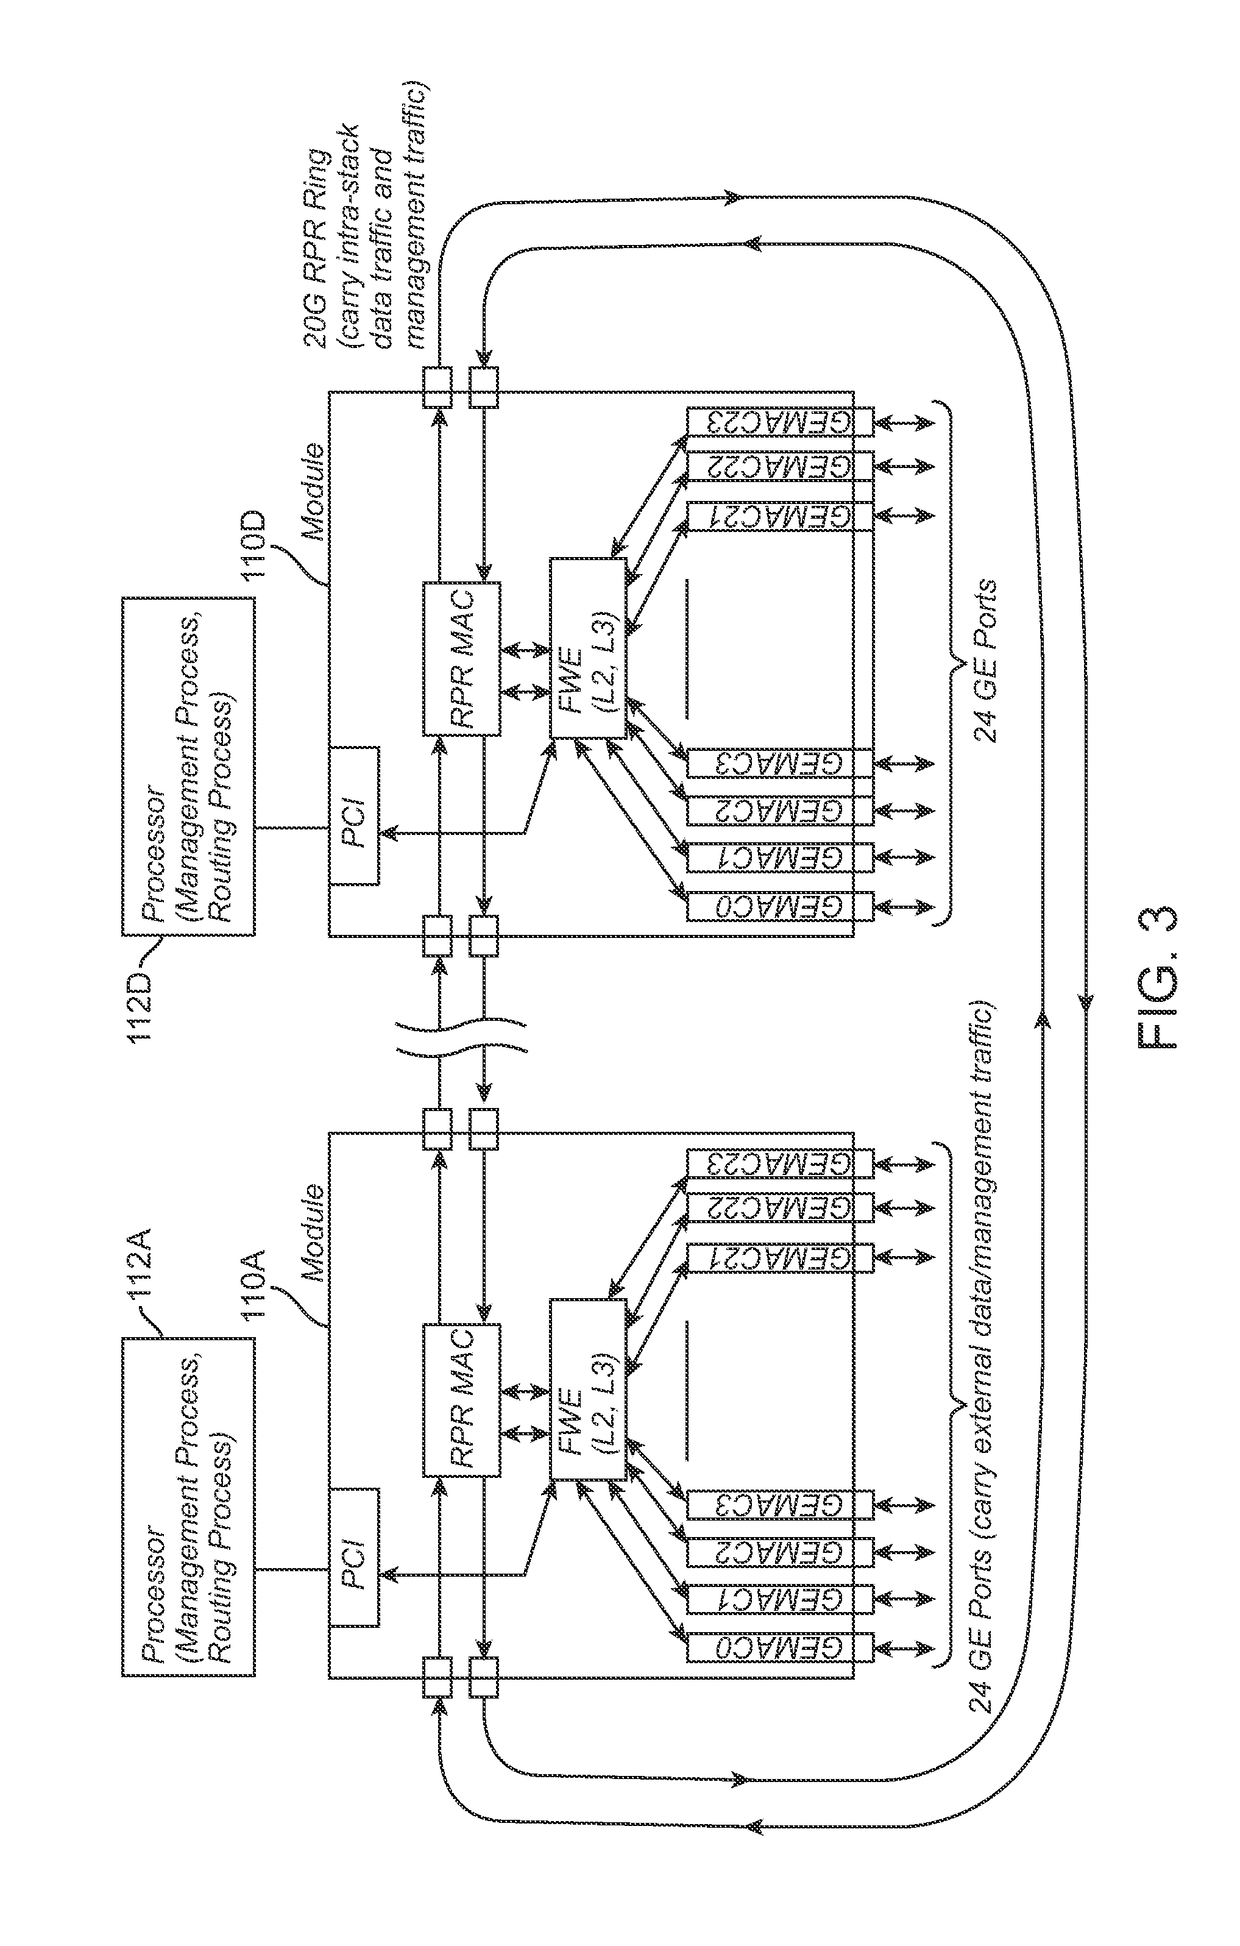 Stacked network switch using resilient packet ring communication protocol